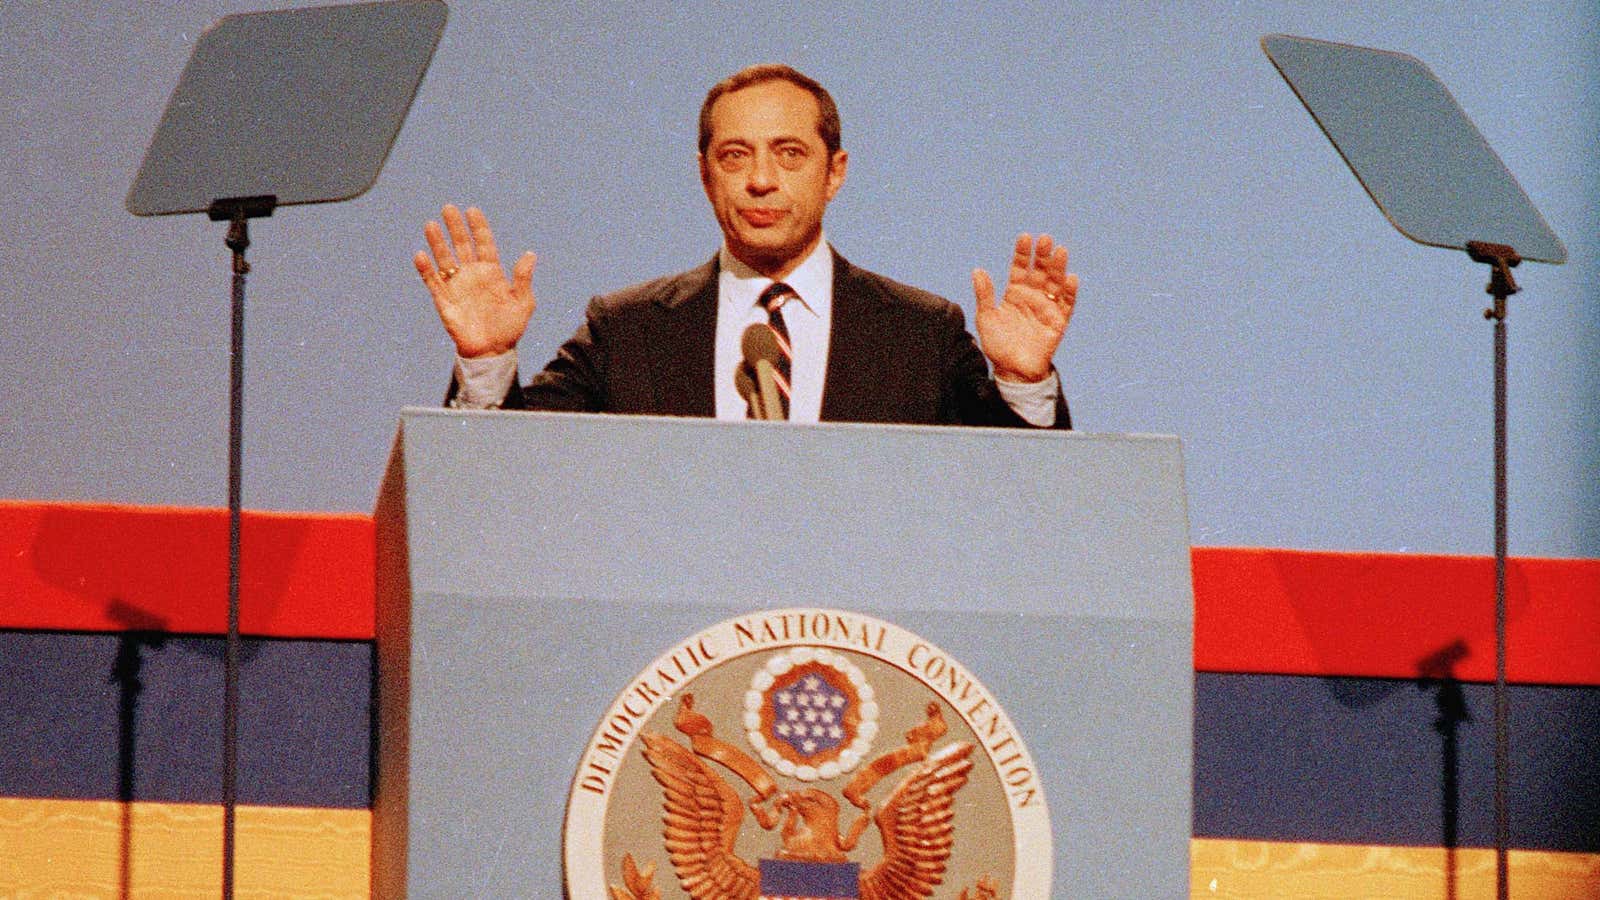 Mario Cuomo delivers his keynote address to the Democratic National Convention on July 16,  1984